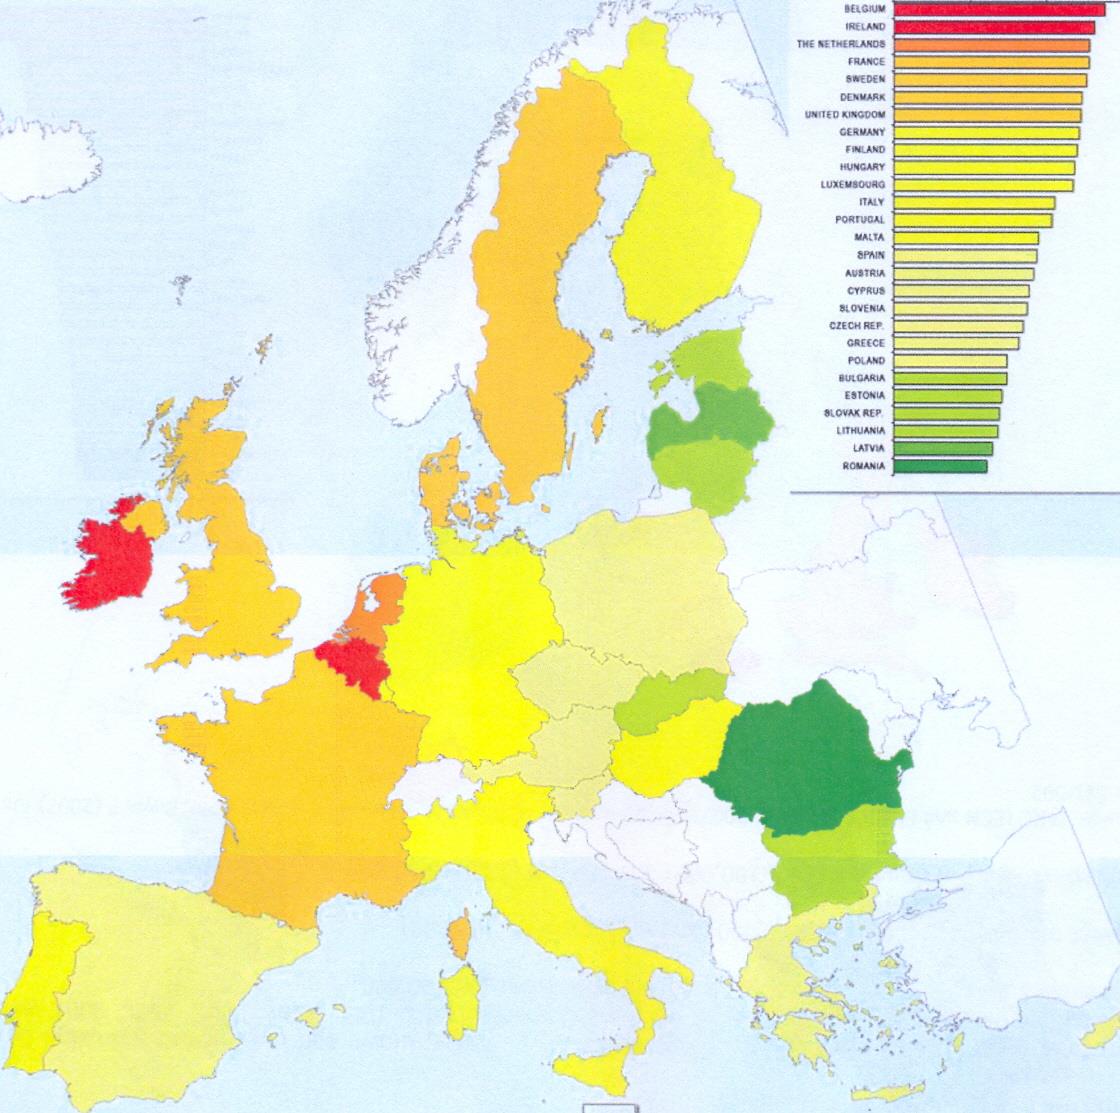 Breast cancer incidence in the EU Member States